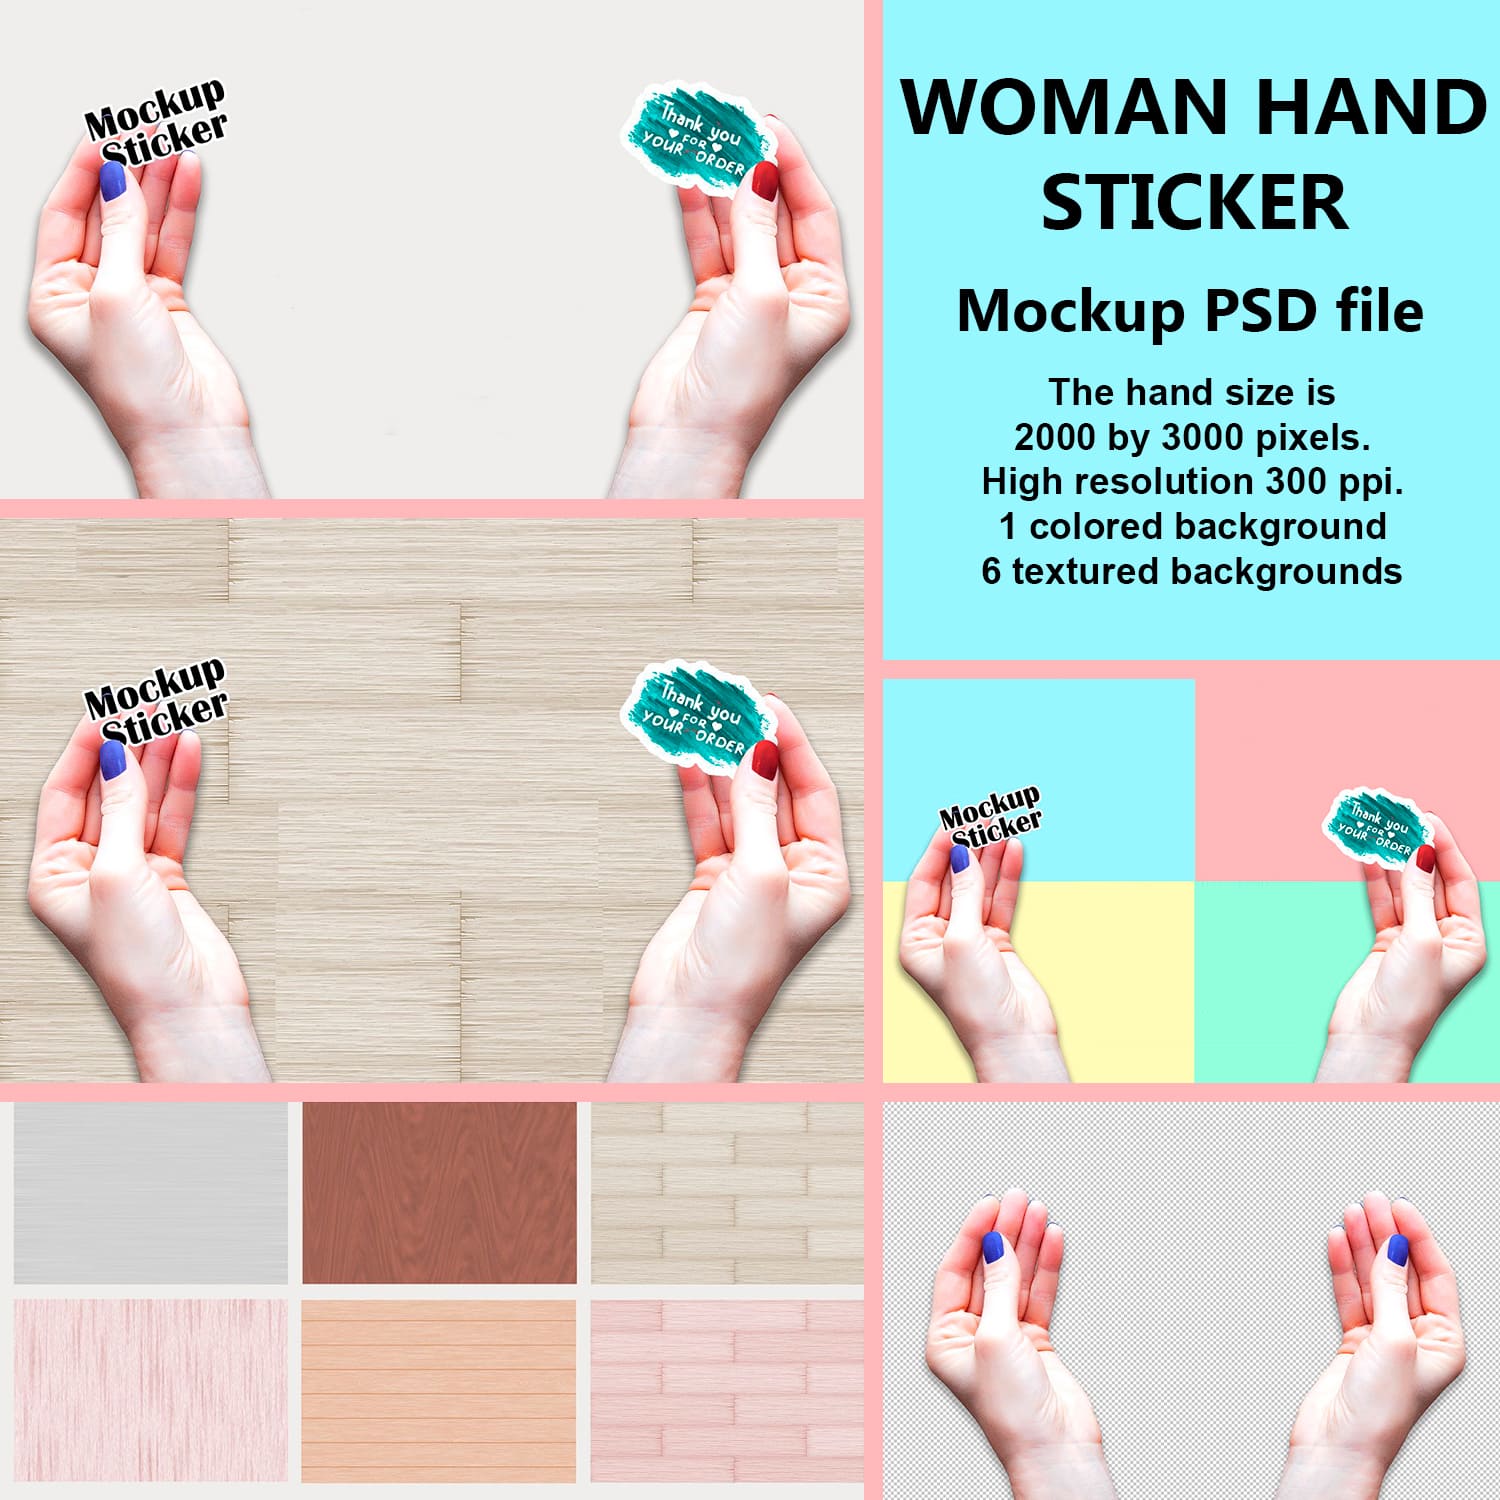 Collection of images of charming stickers in the form of a woman's hand.